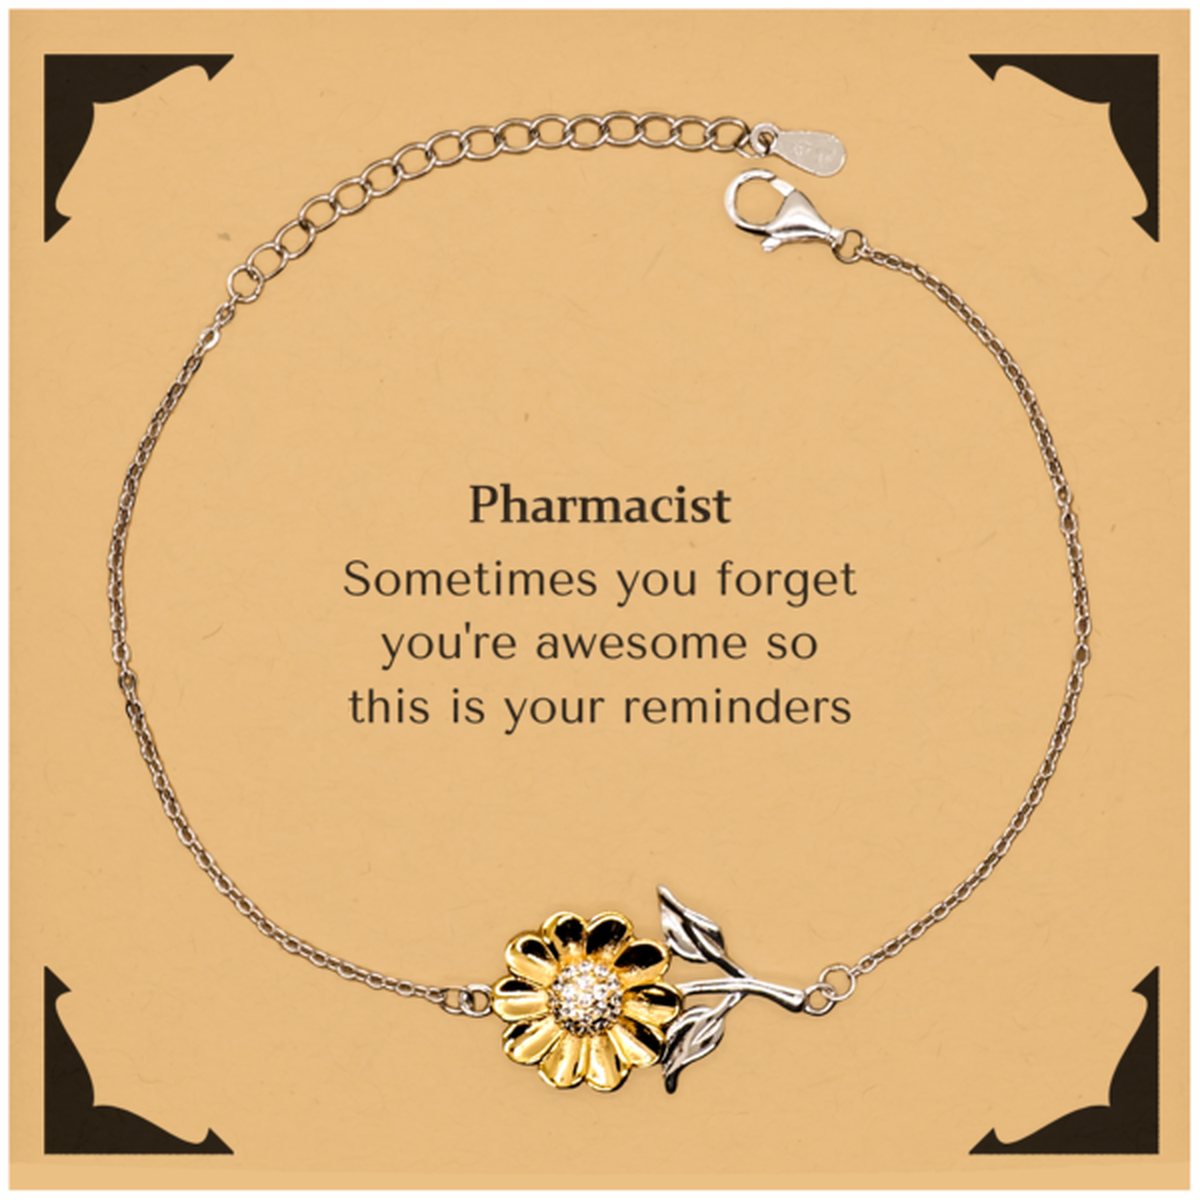 Sentimental Pharmacist Sunflower Bracelet, Pharmacist Sometimes you forget you're awesome so this is your reminders, Graduation Christmas Birthday Gifts for Pharmacist, Men, Women, Coworkers